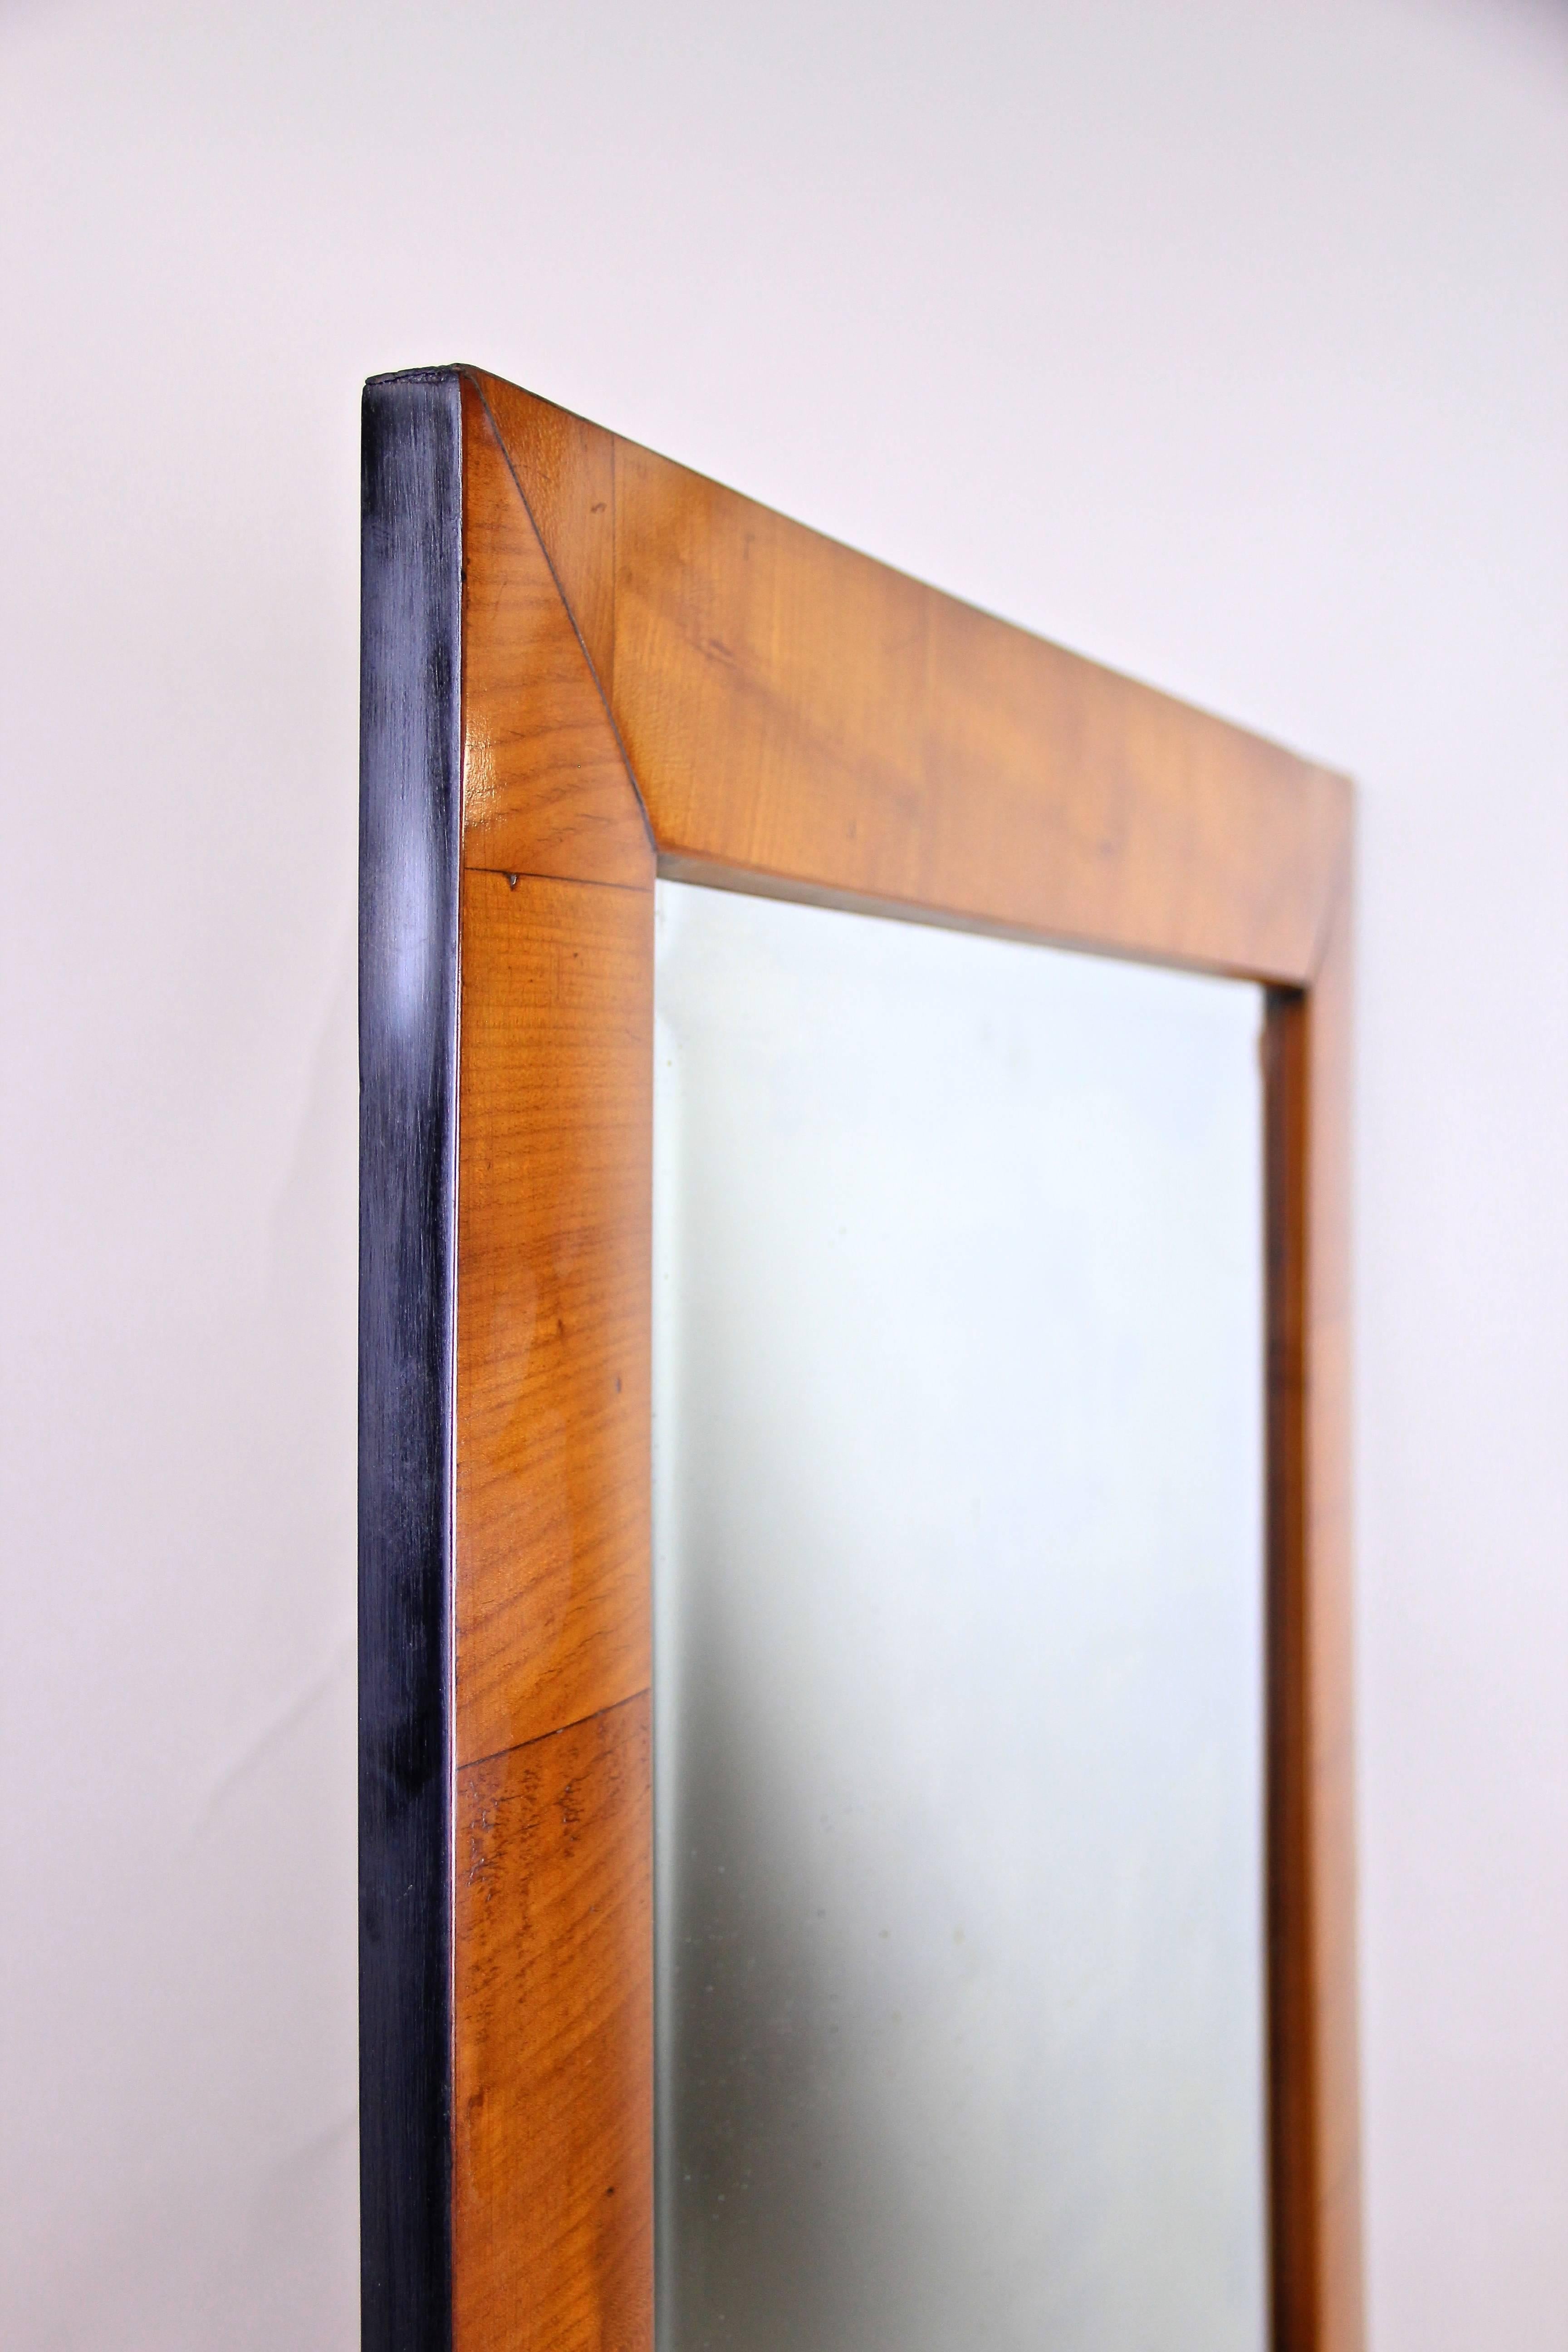 A magnificent Biedermeier Wall Mirror dating to circa 1830 during the early Biedermeier period in South Germany. This beautiful rectangular mirror has an substructure where the connections were made in an old technique called 